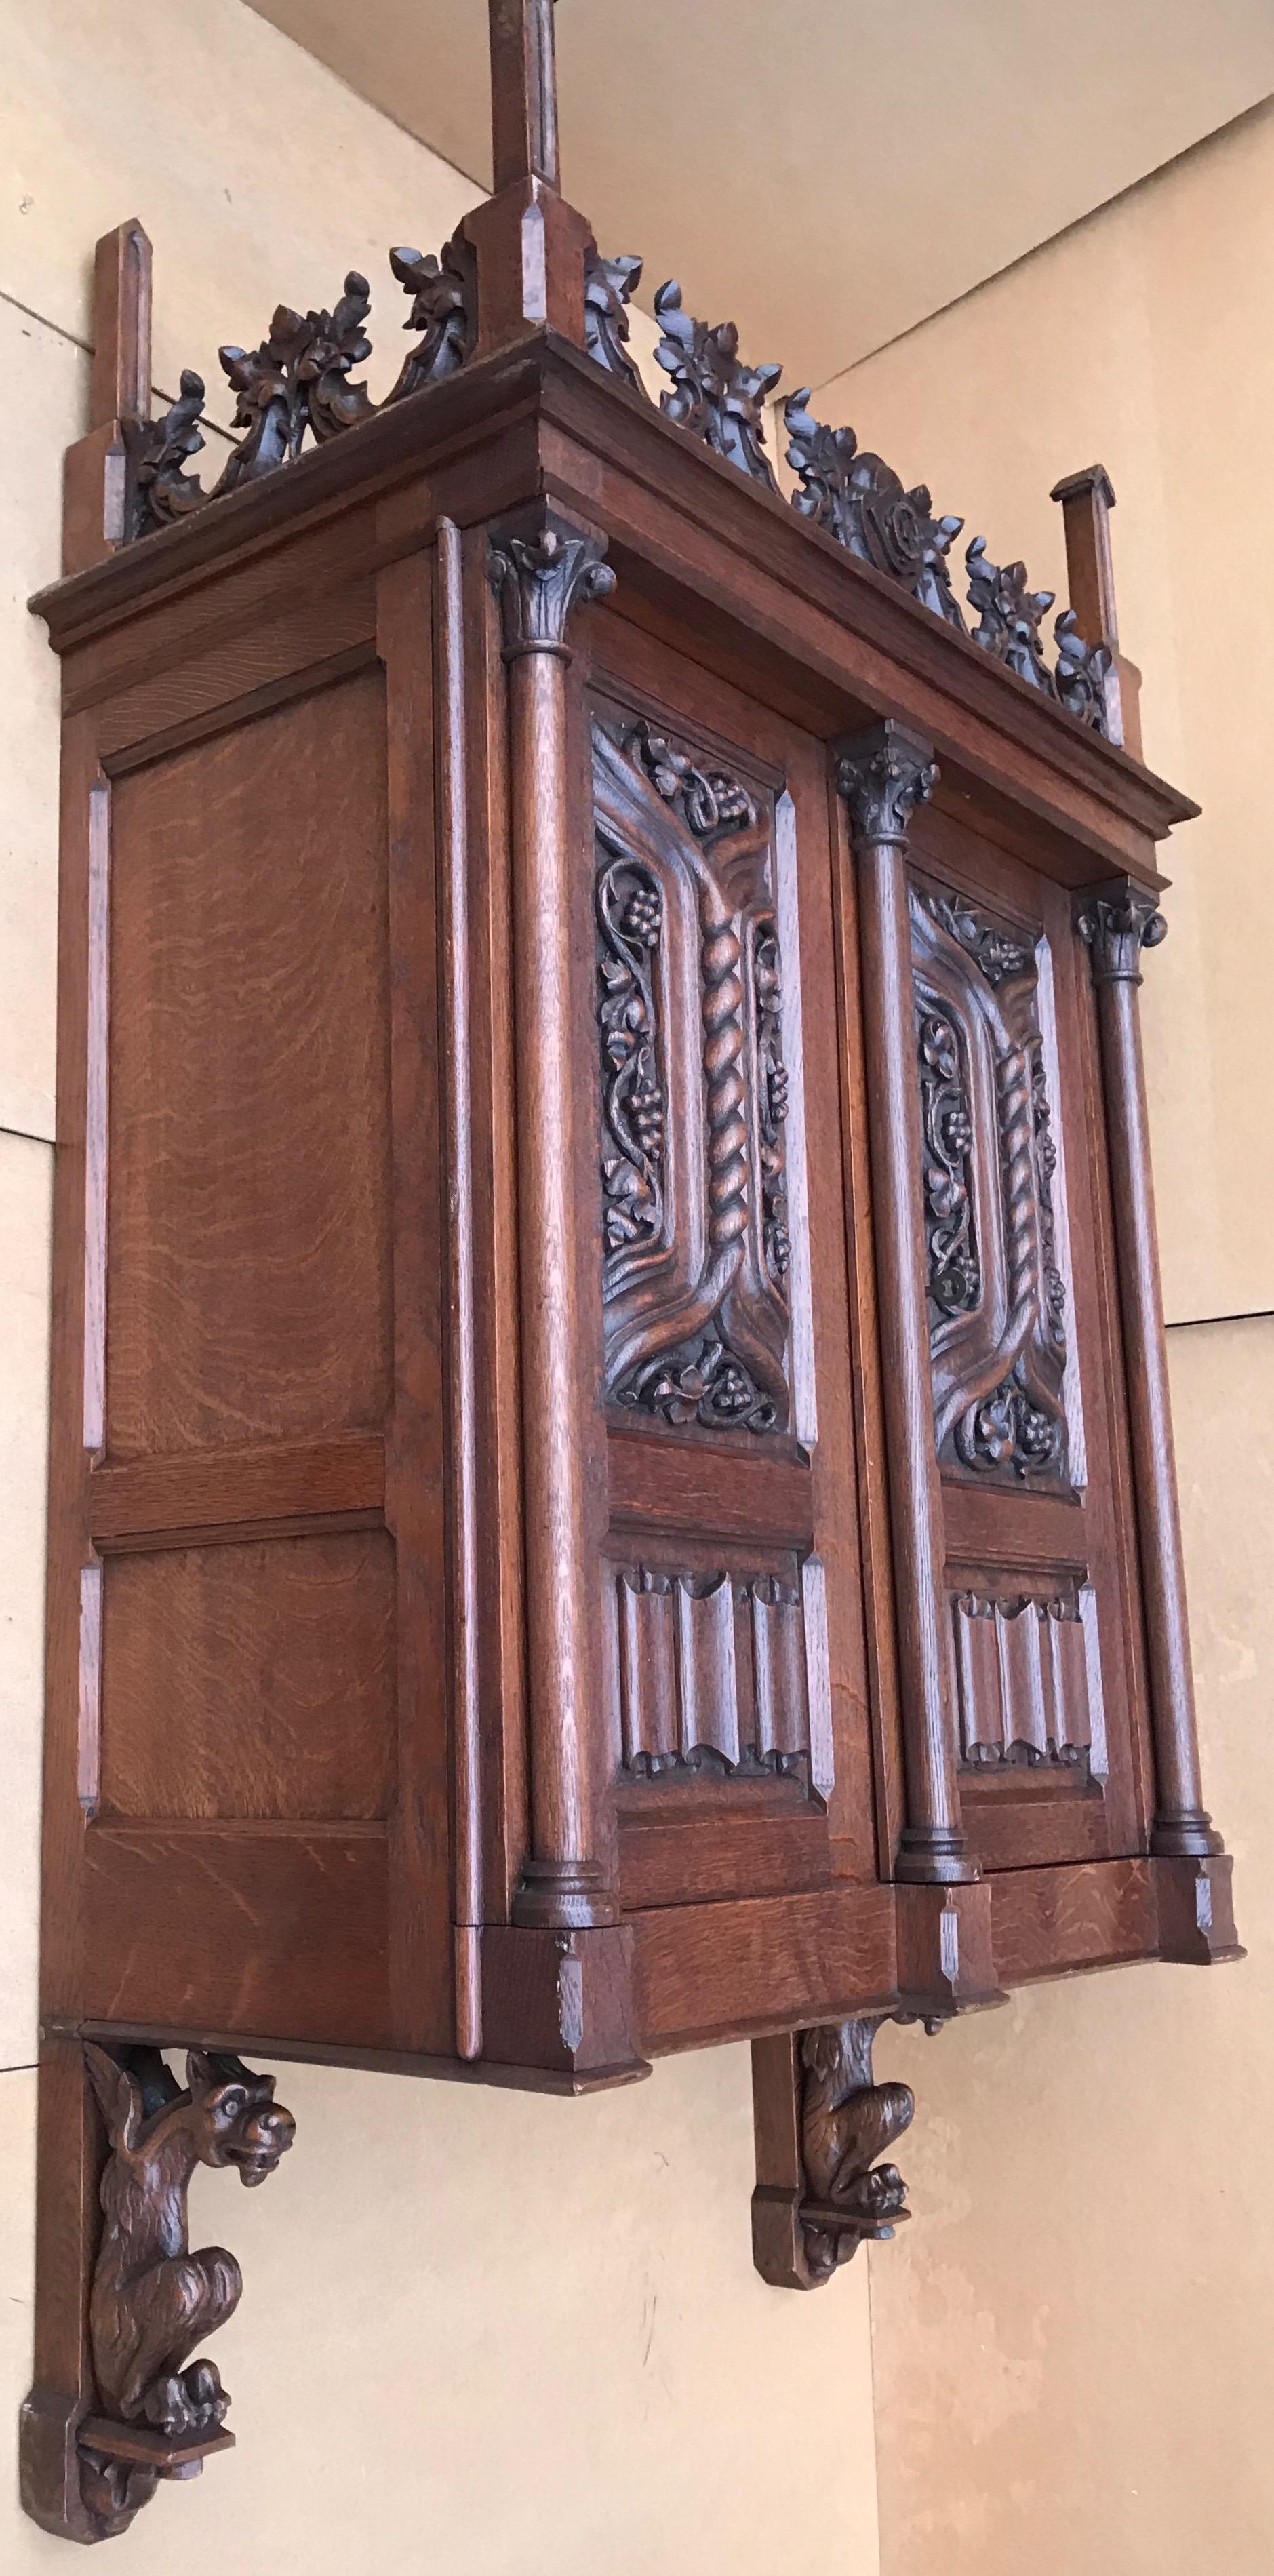 Hand-Carved Antique Gothic Revival Hand Carved Oak Wall Cabinet with Gargoyles Sculptures